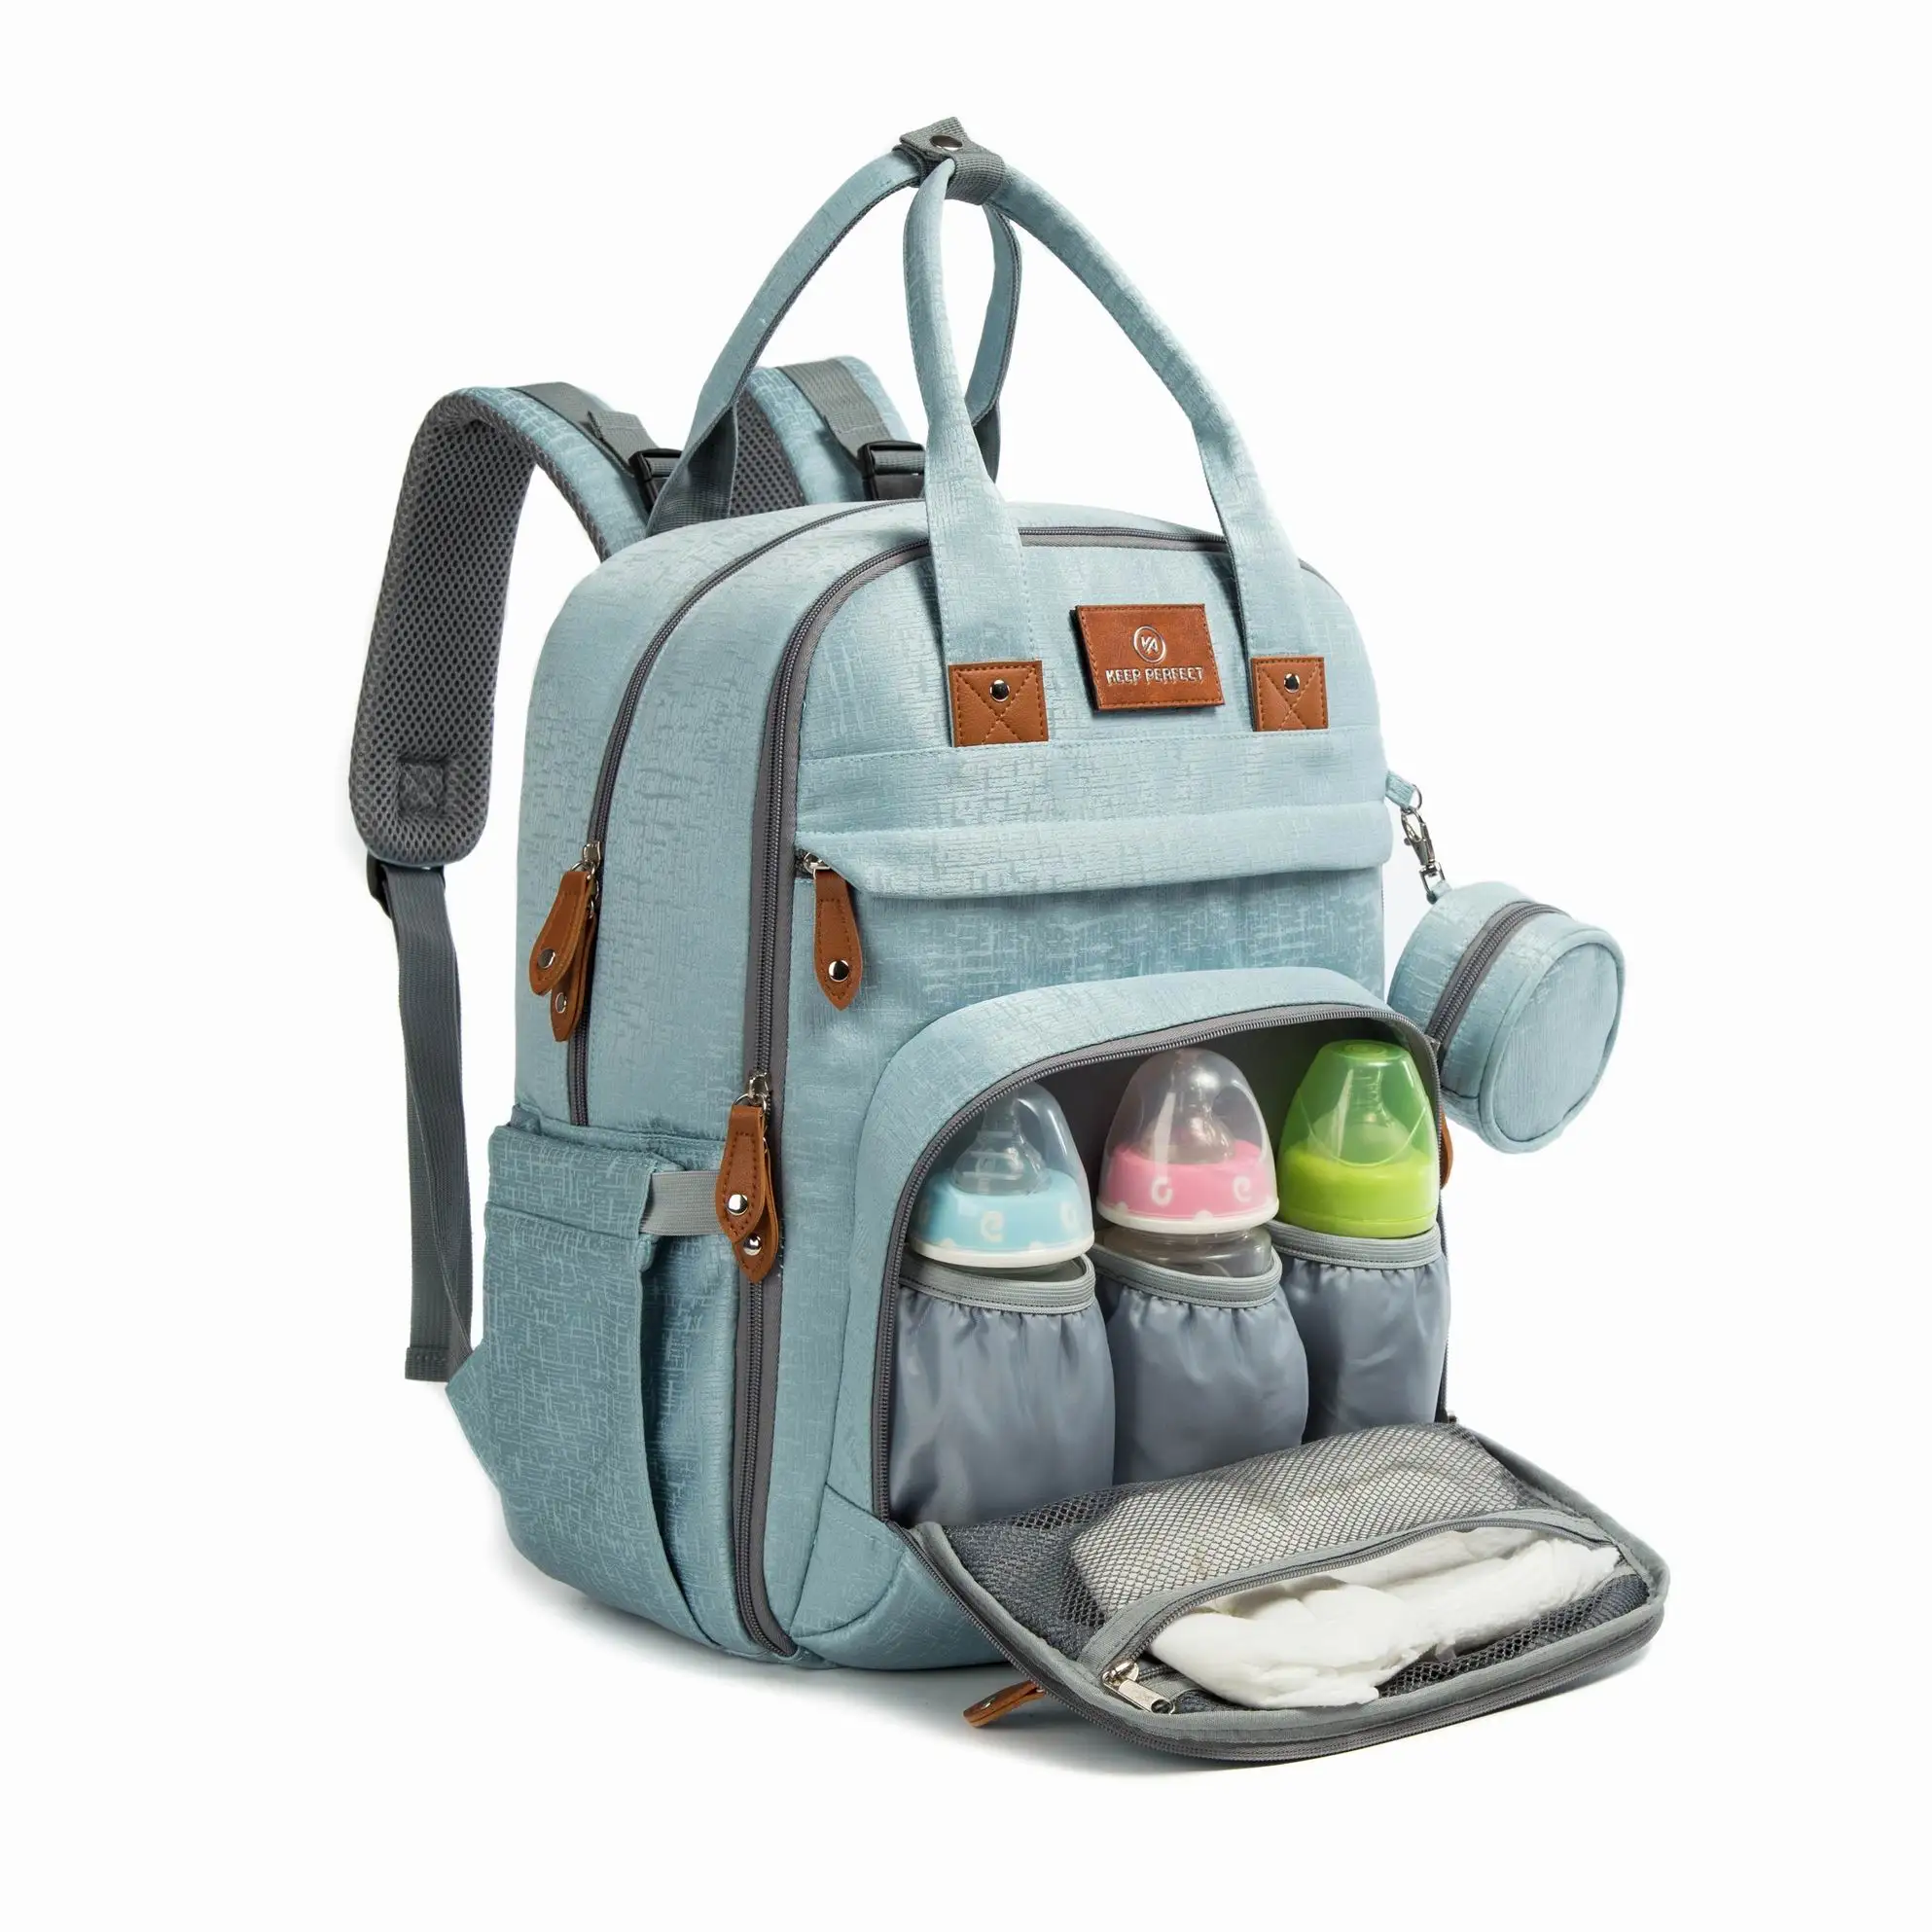 

Sac A Langer Customized Waterproof Maternity Mummy Nappy Bags Baby wickeltasche Diaper Bag Backpack Foldable Bed with Changing Station, Contact supplier